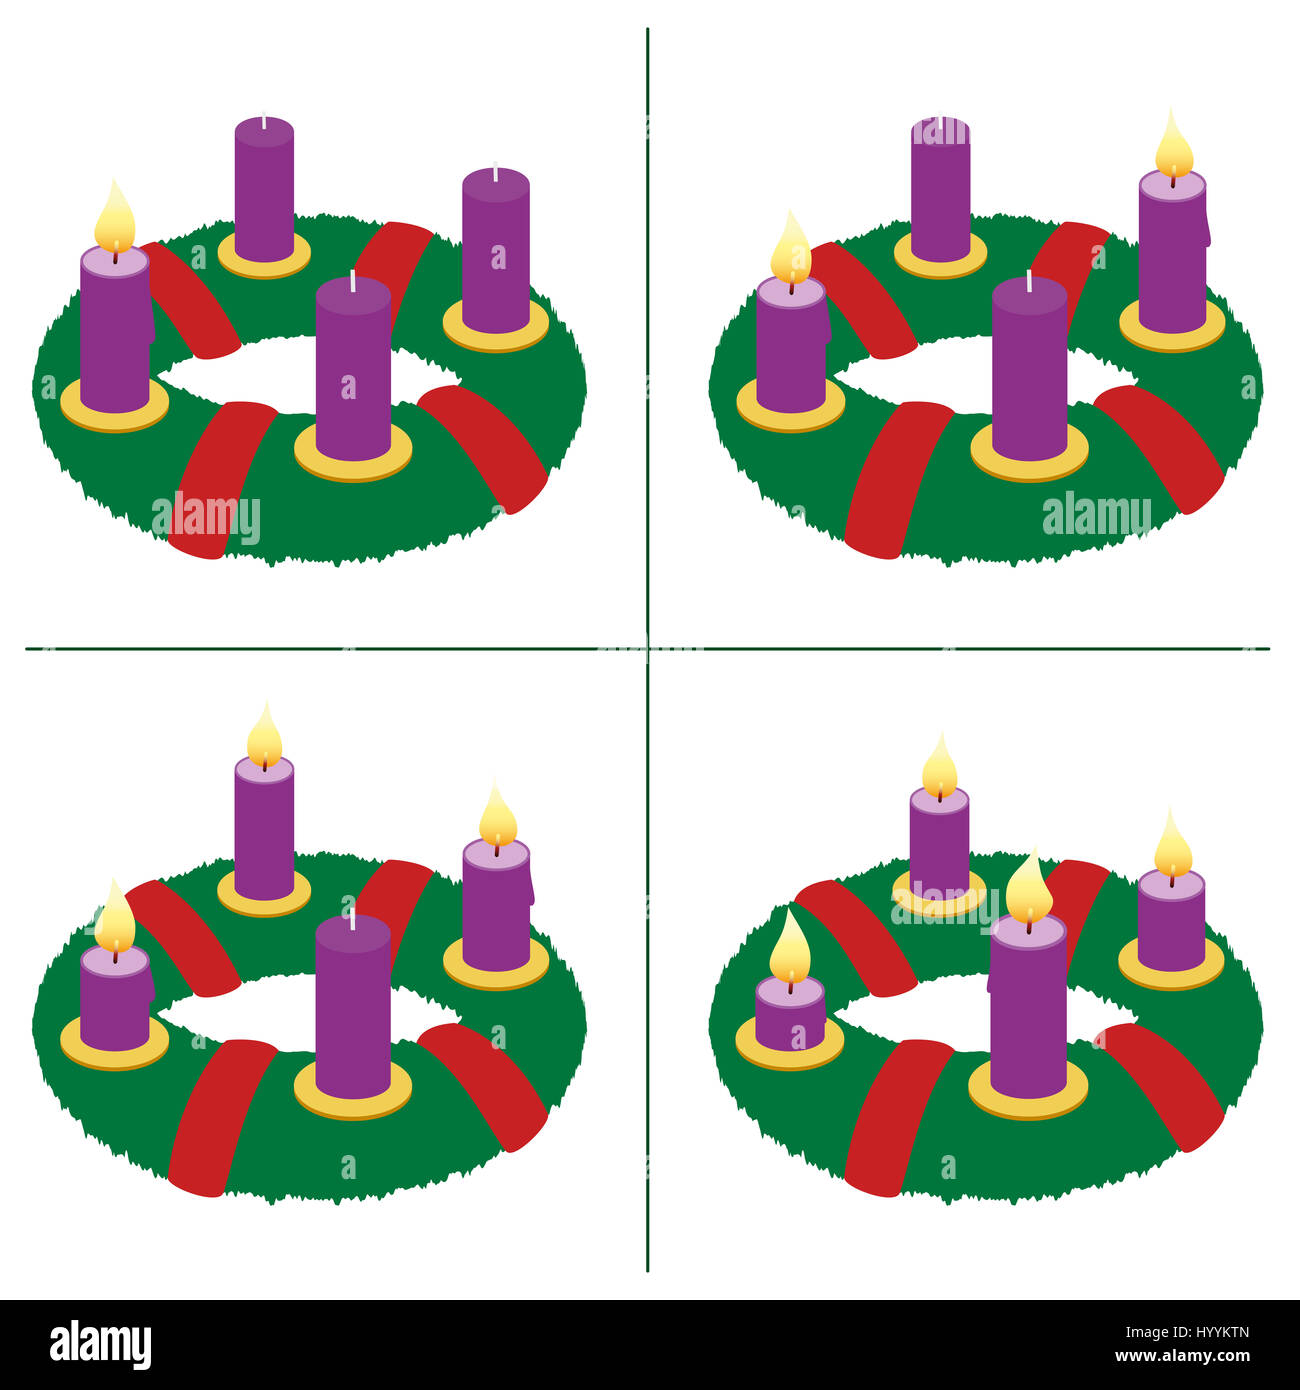 Advent wreath on first, second, third, fourth Sunday of Advent - with one, two, three and four lighted candles in different lengths. Stock Photo